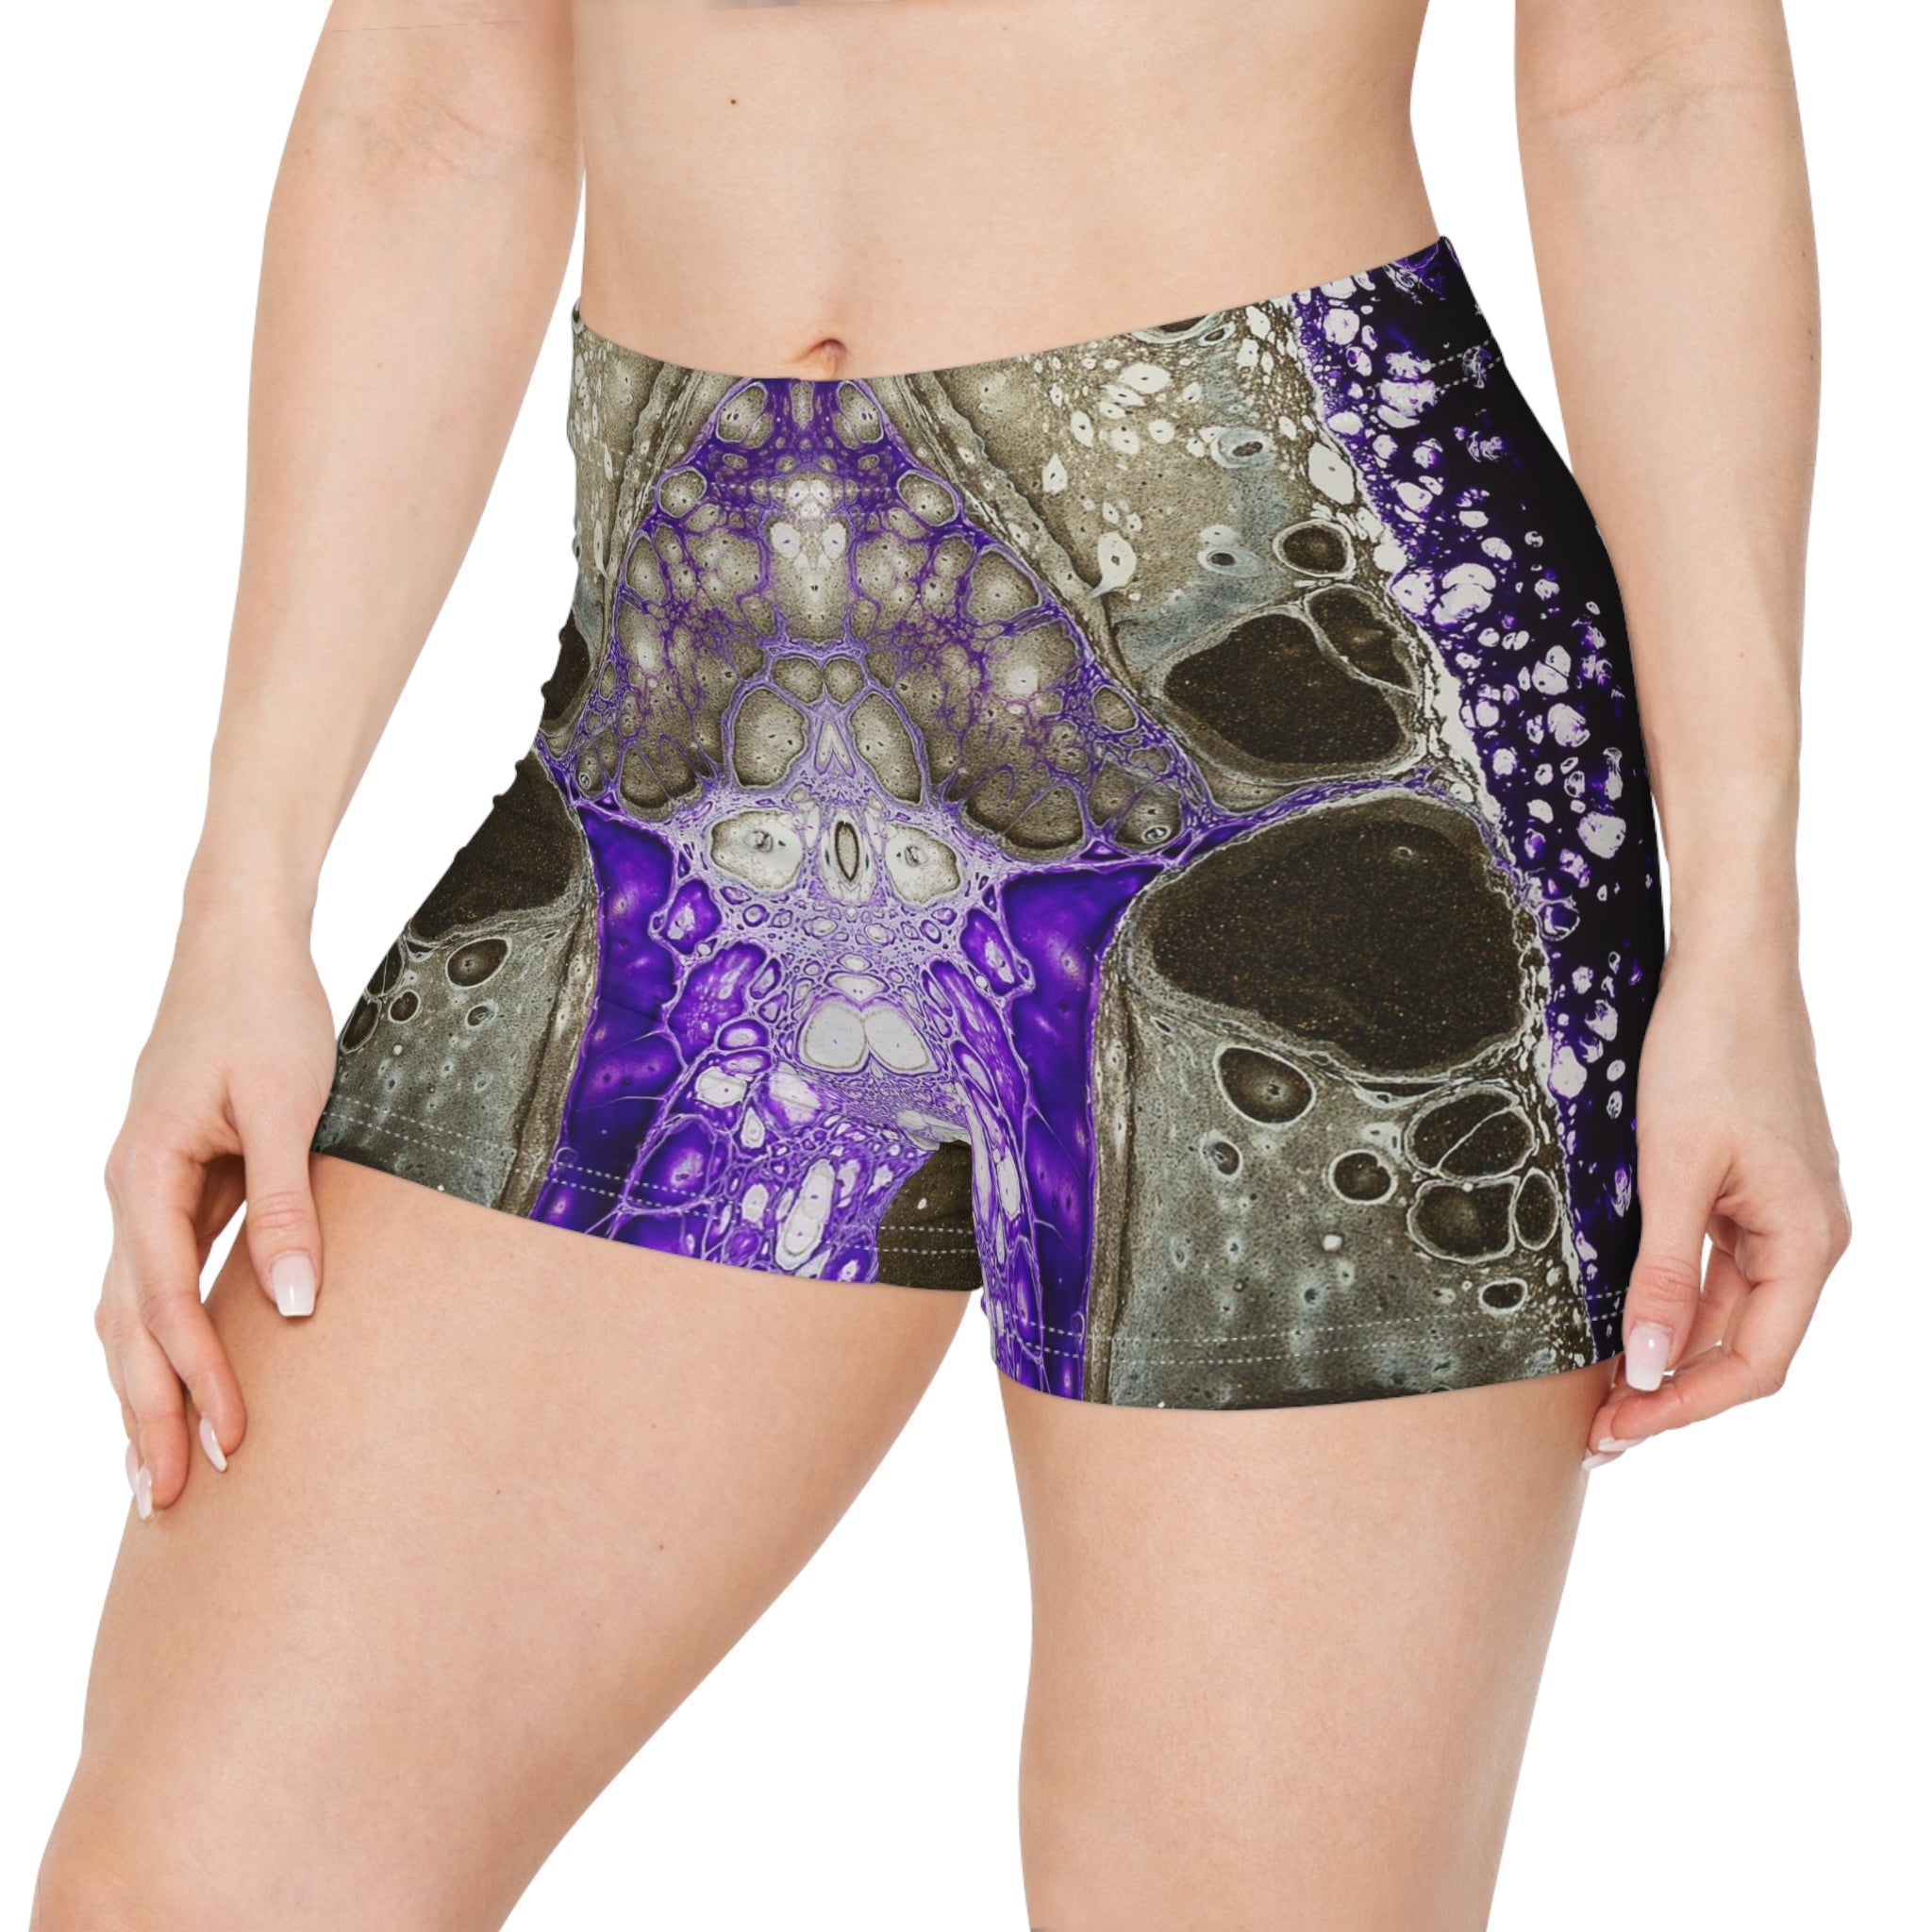 Women's Sport Shorts - The Approach - Front